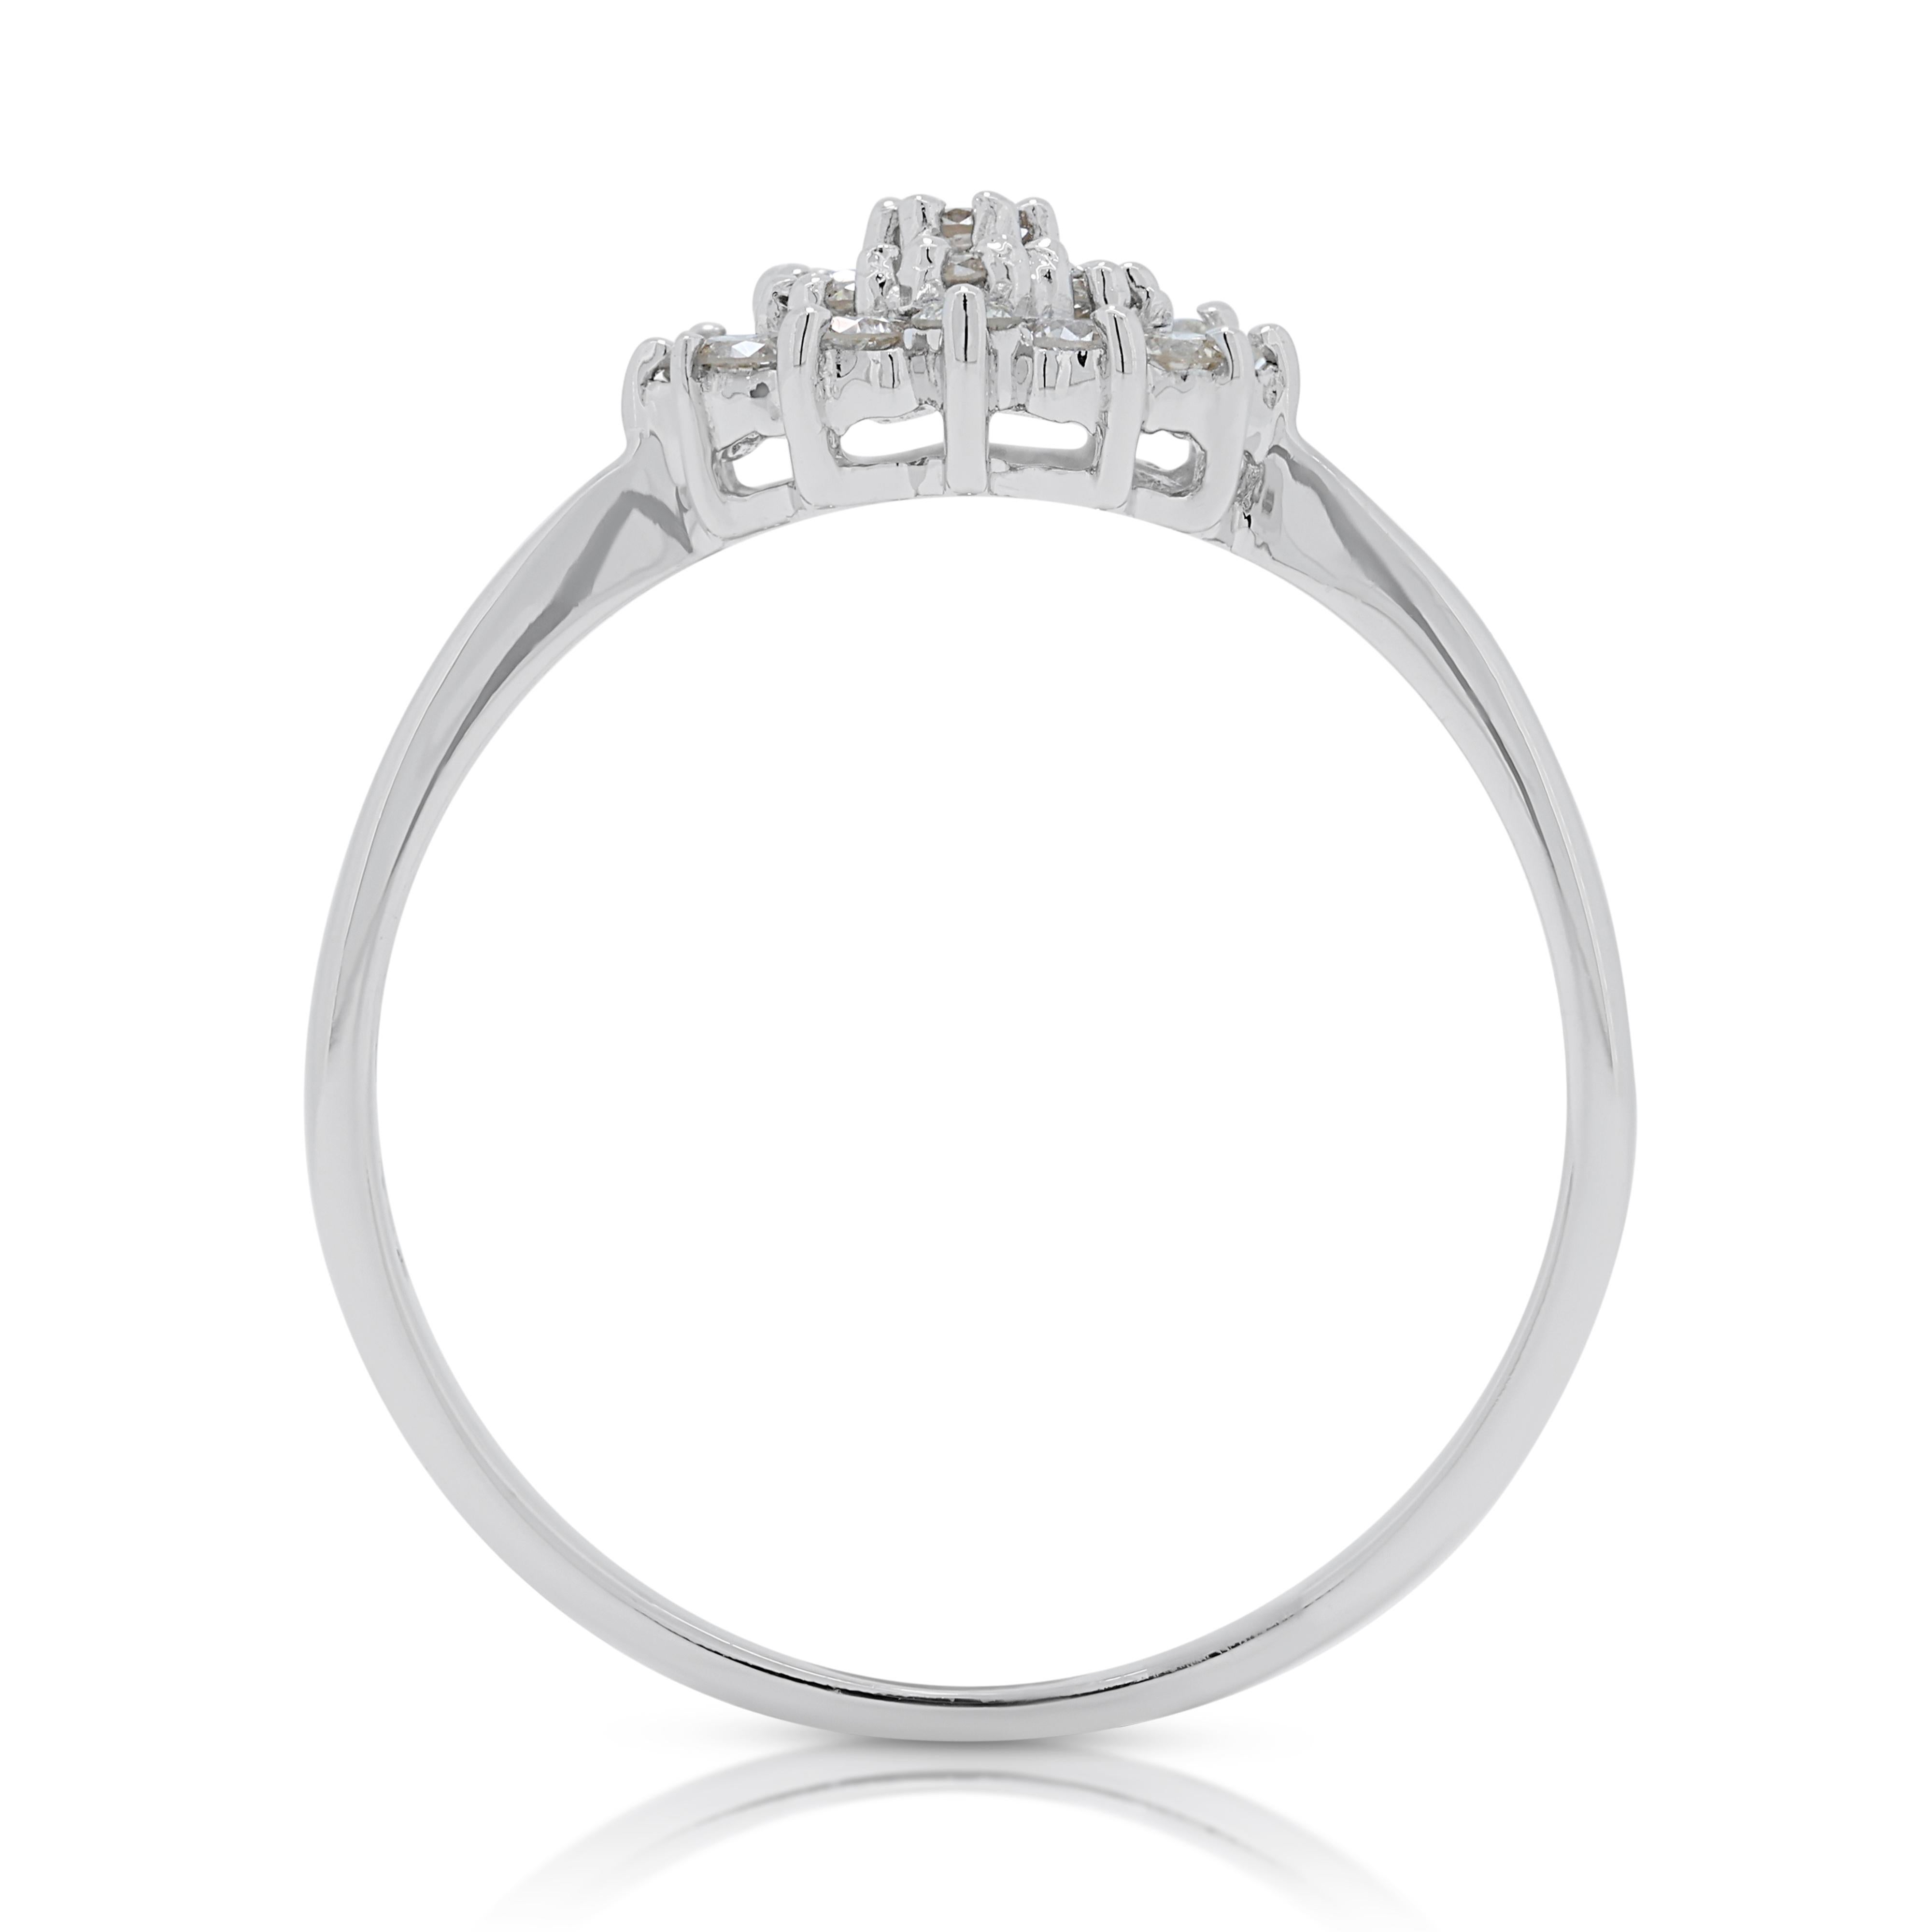 Captivating 0.4ct Diamond Stud Ring in 18K White Gold For Sale 2